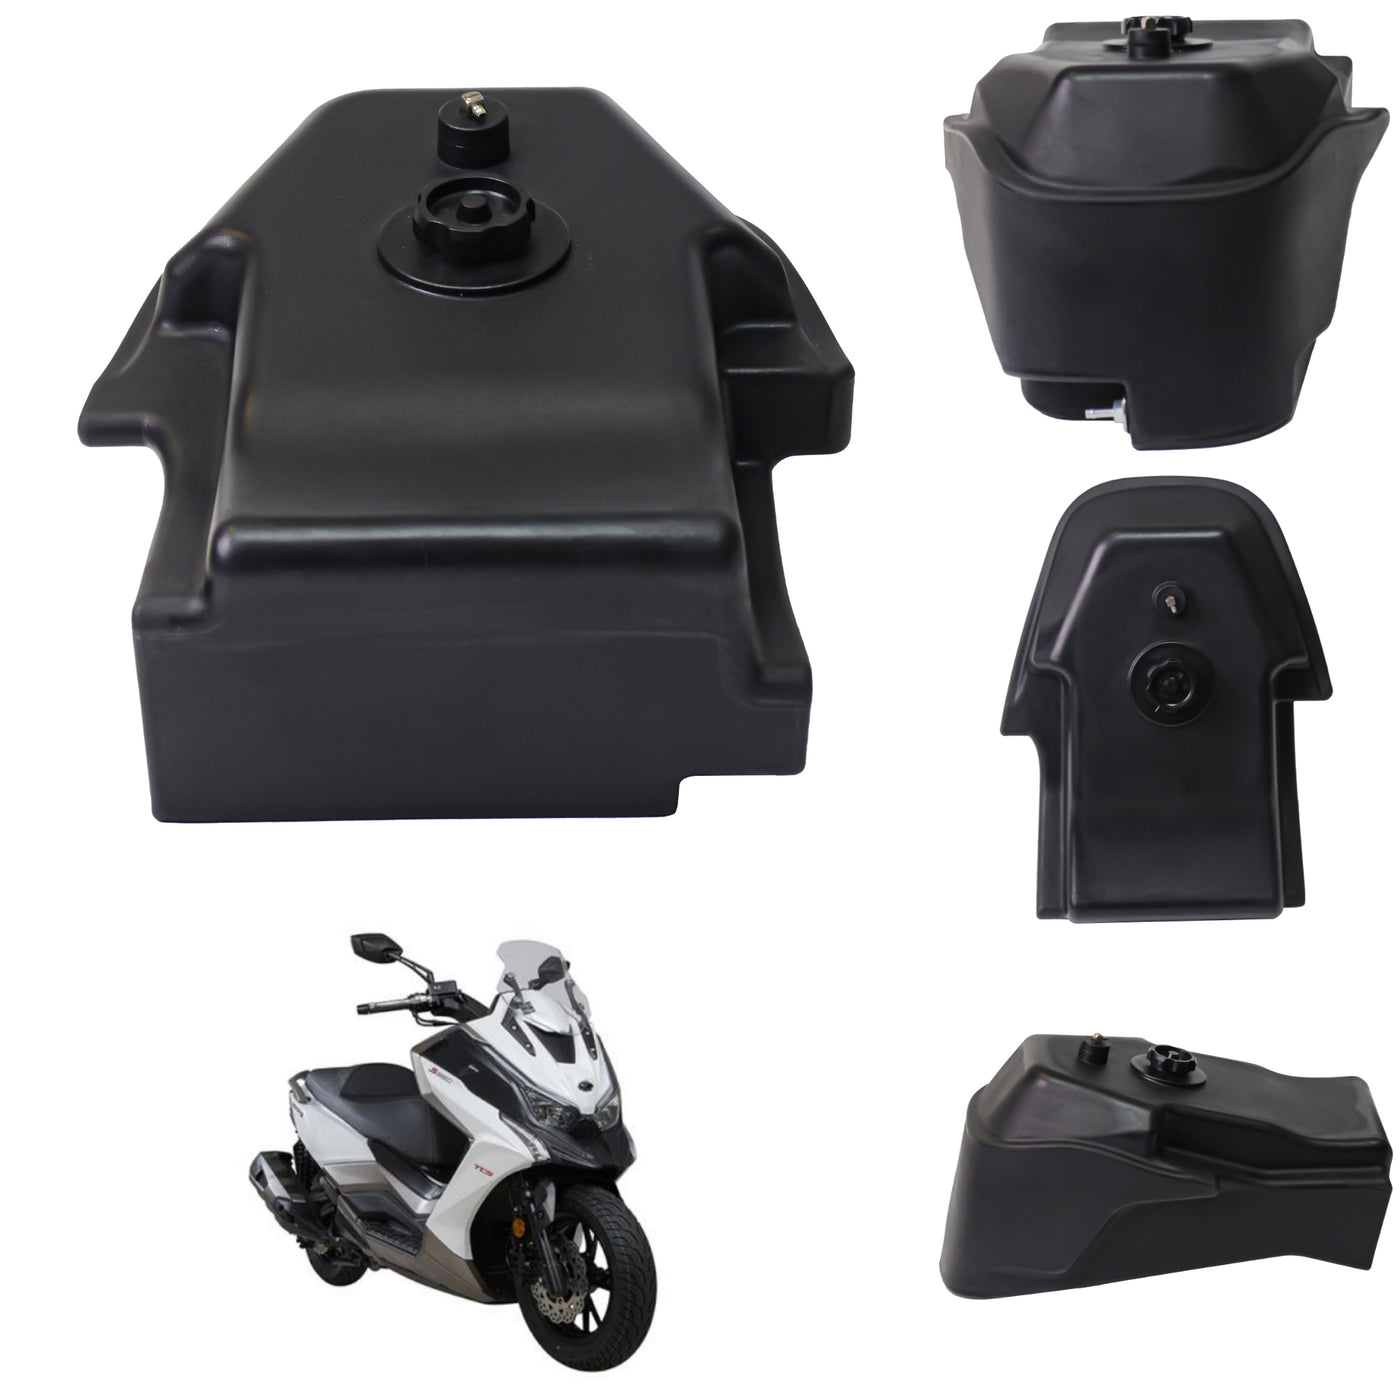 KYMCO Motorcycle Auxiliary Fuel Tank Made of PE Material for Rowing S350 (17.32x12.20x11.81 inches, 13L)